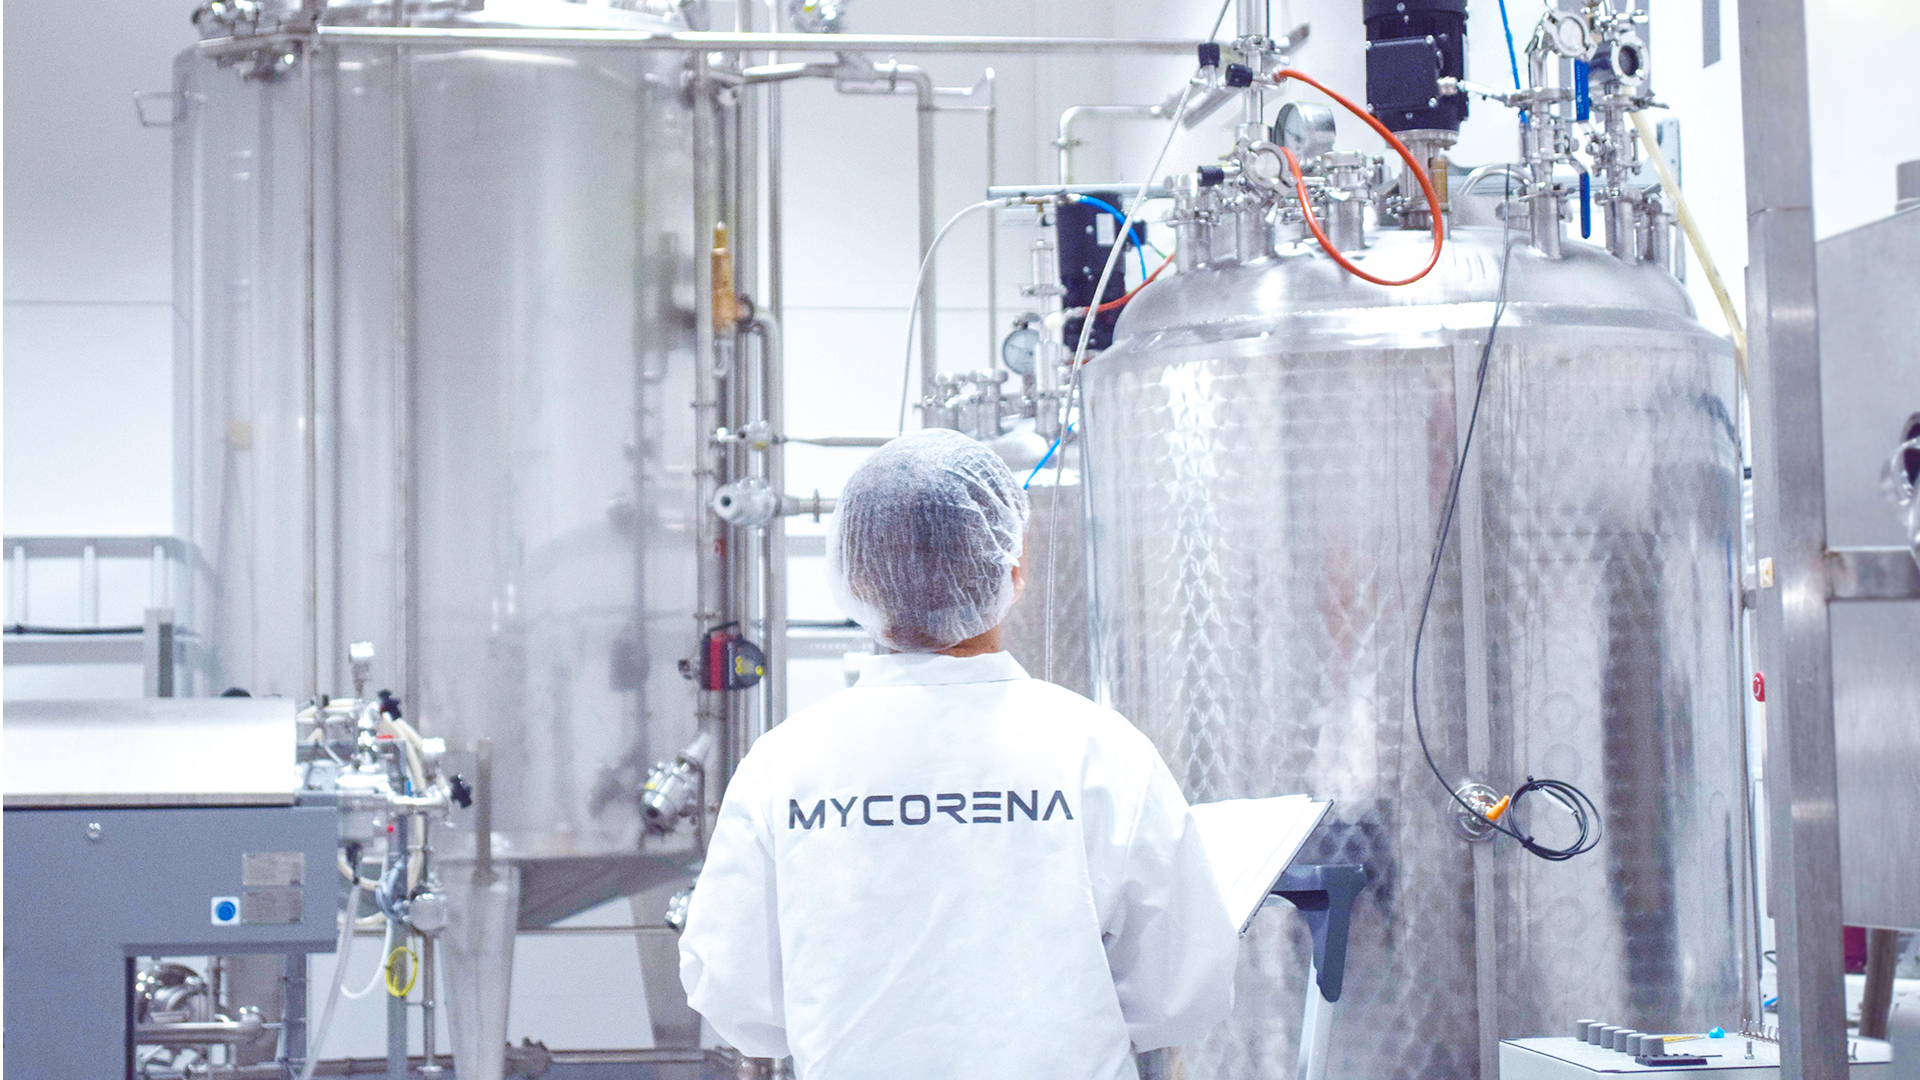 Mycorena AB Files for Bankruptcy